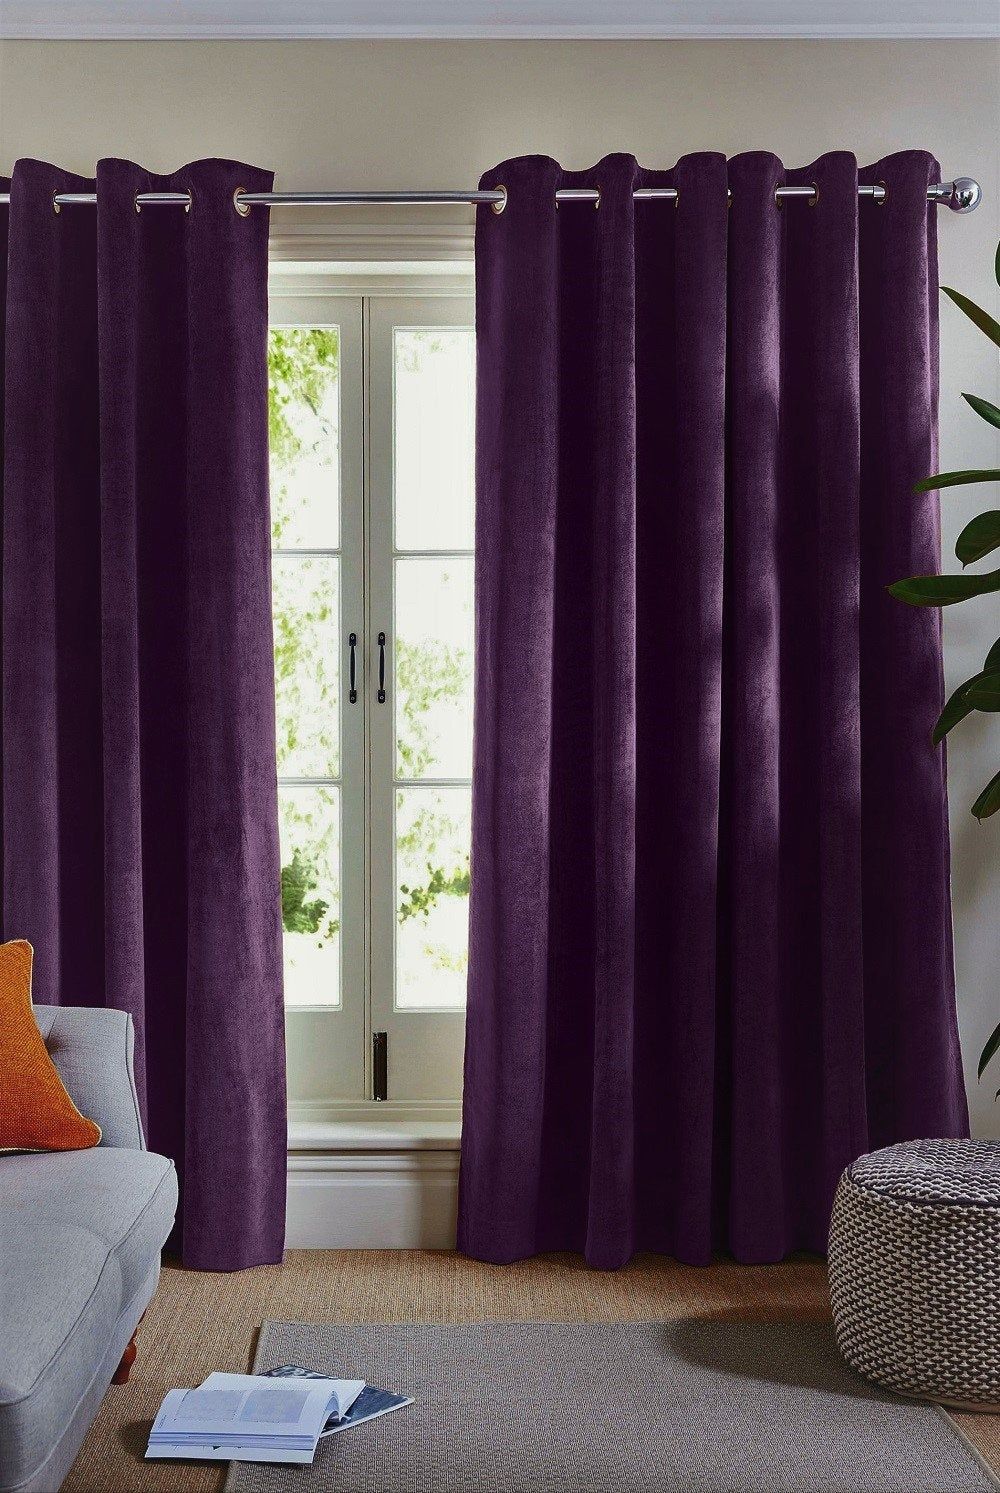 Purple Curtains: Adding a Pop of Color to Your Home Decor